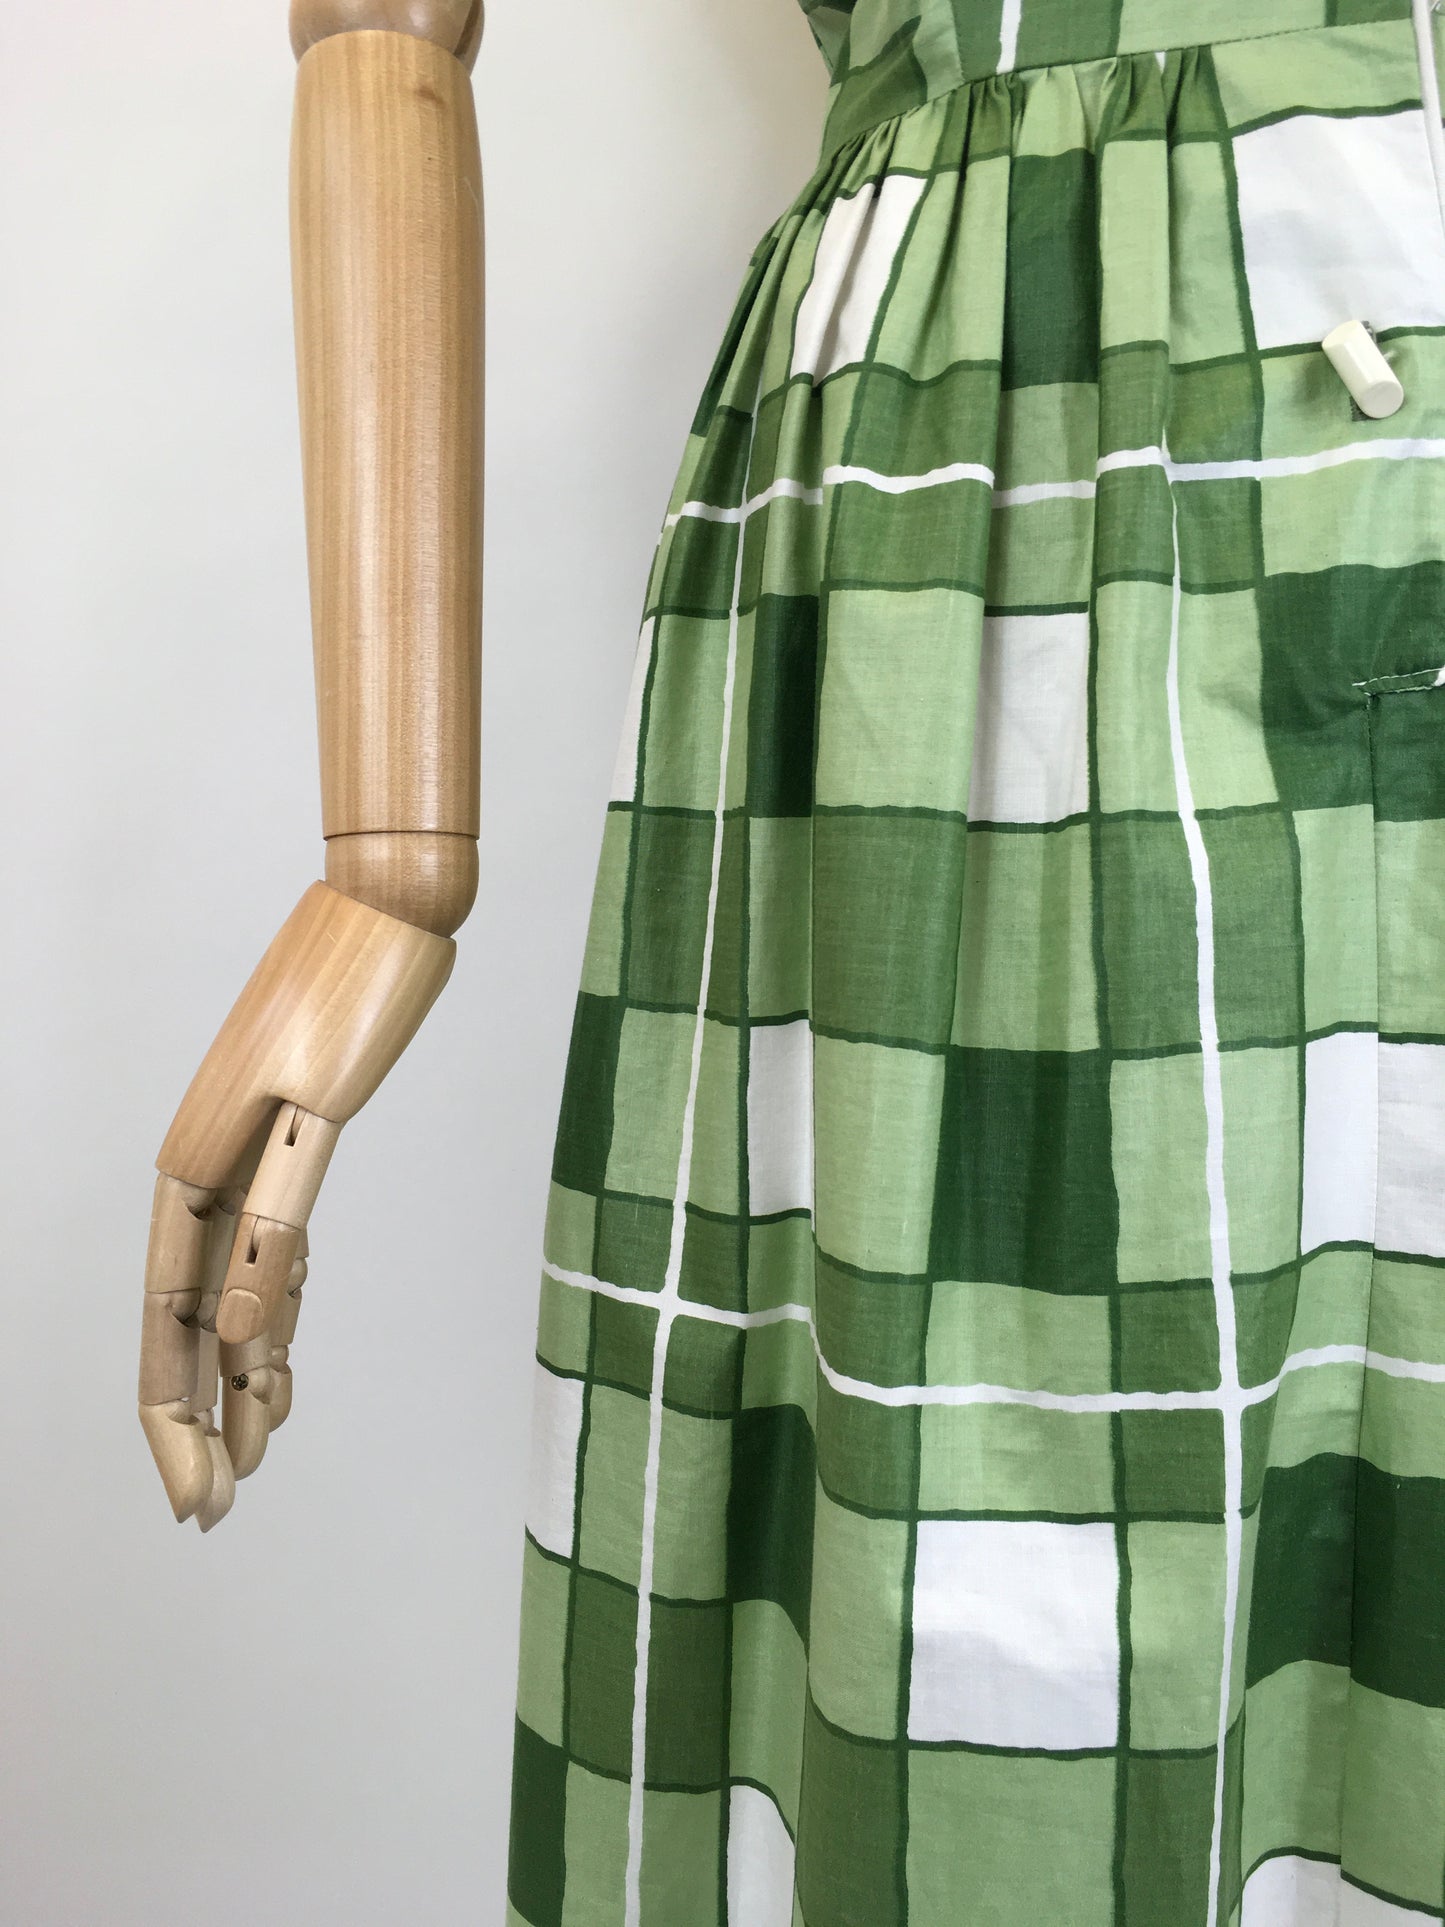 Original 1950's Darling Cotton Day Dress - In Shades of Green & White